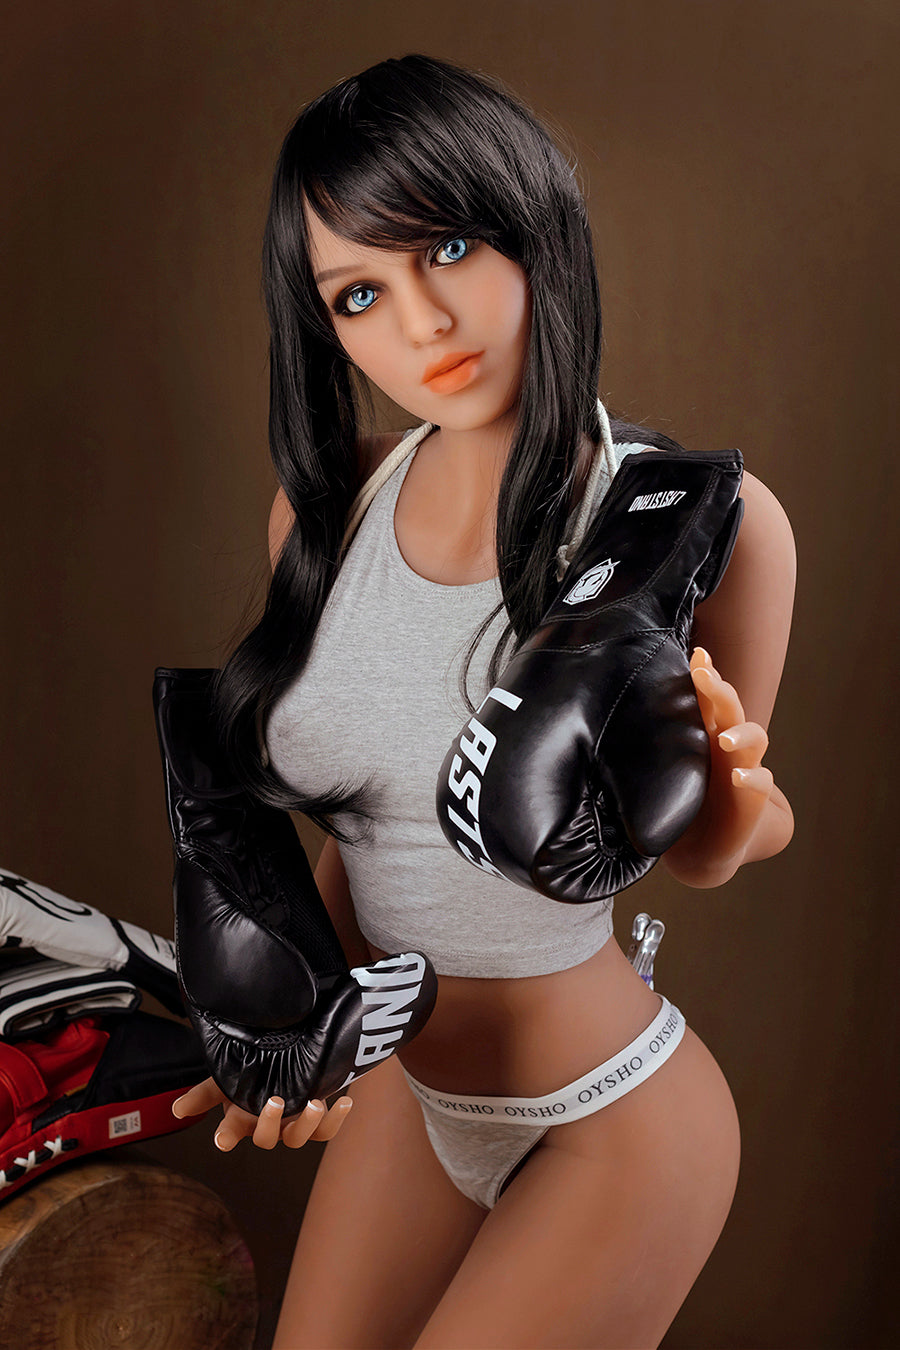 Angelina - B CUP Fitness Girl Realistic Sex Doll 5ft4 (163cm) - Sexindoll